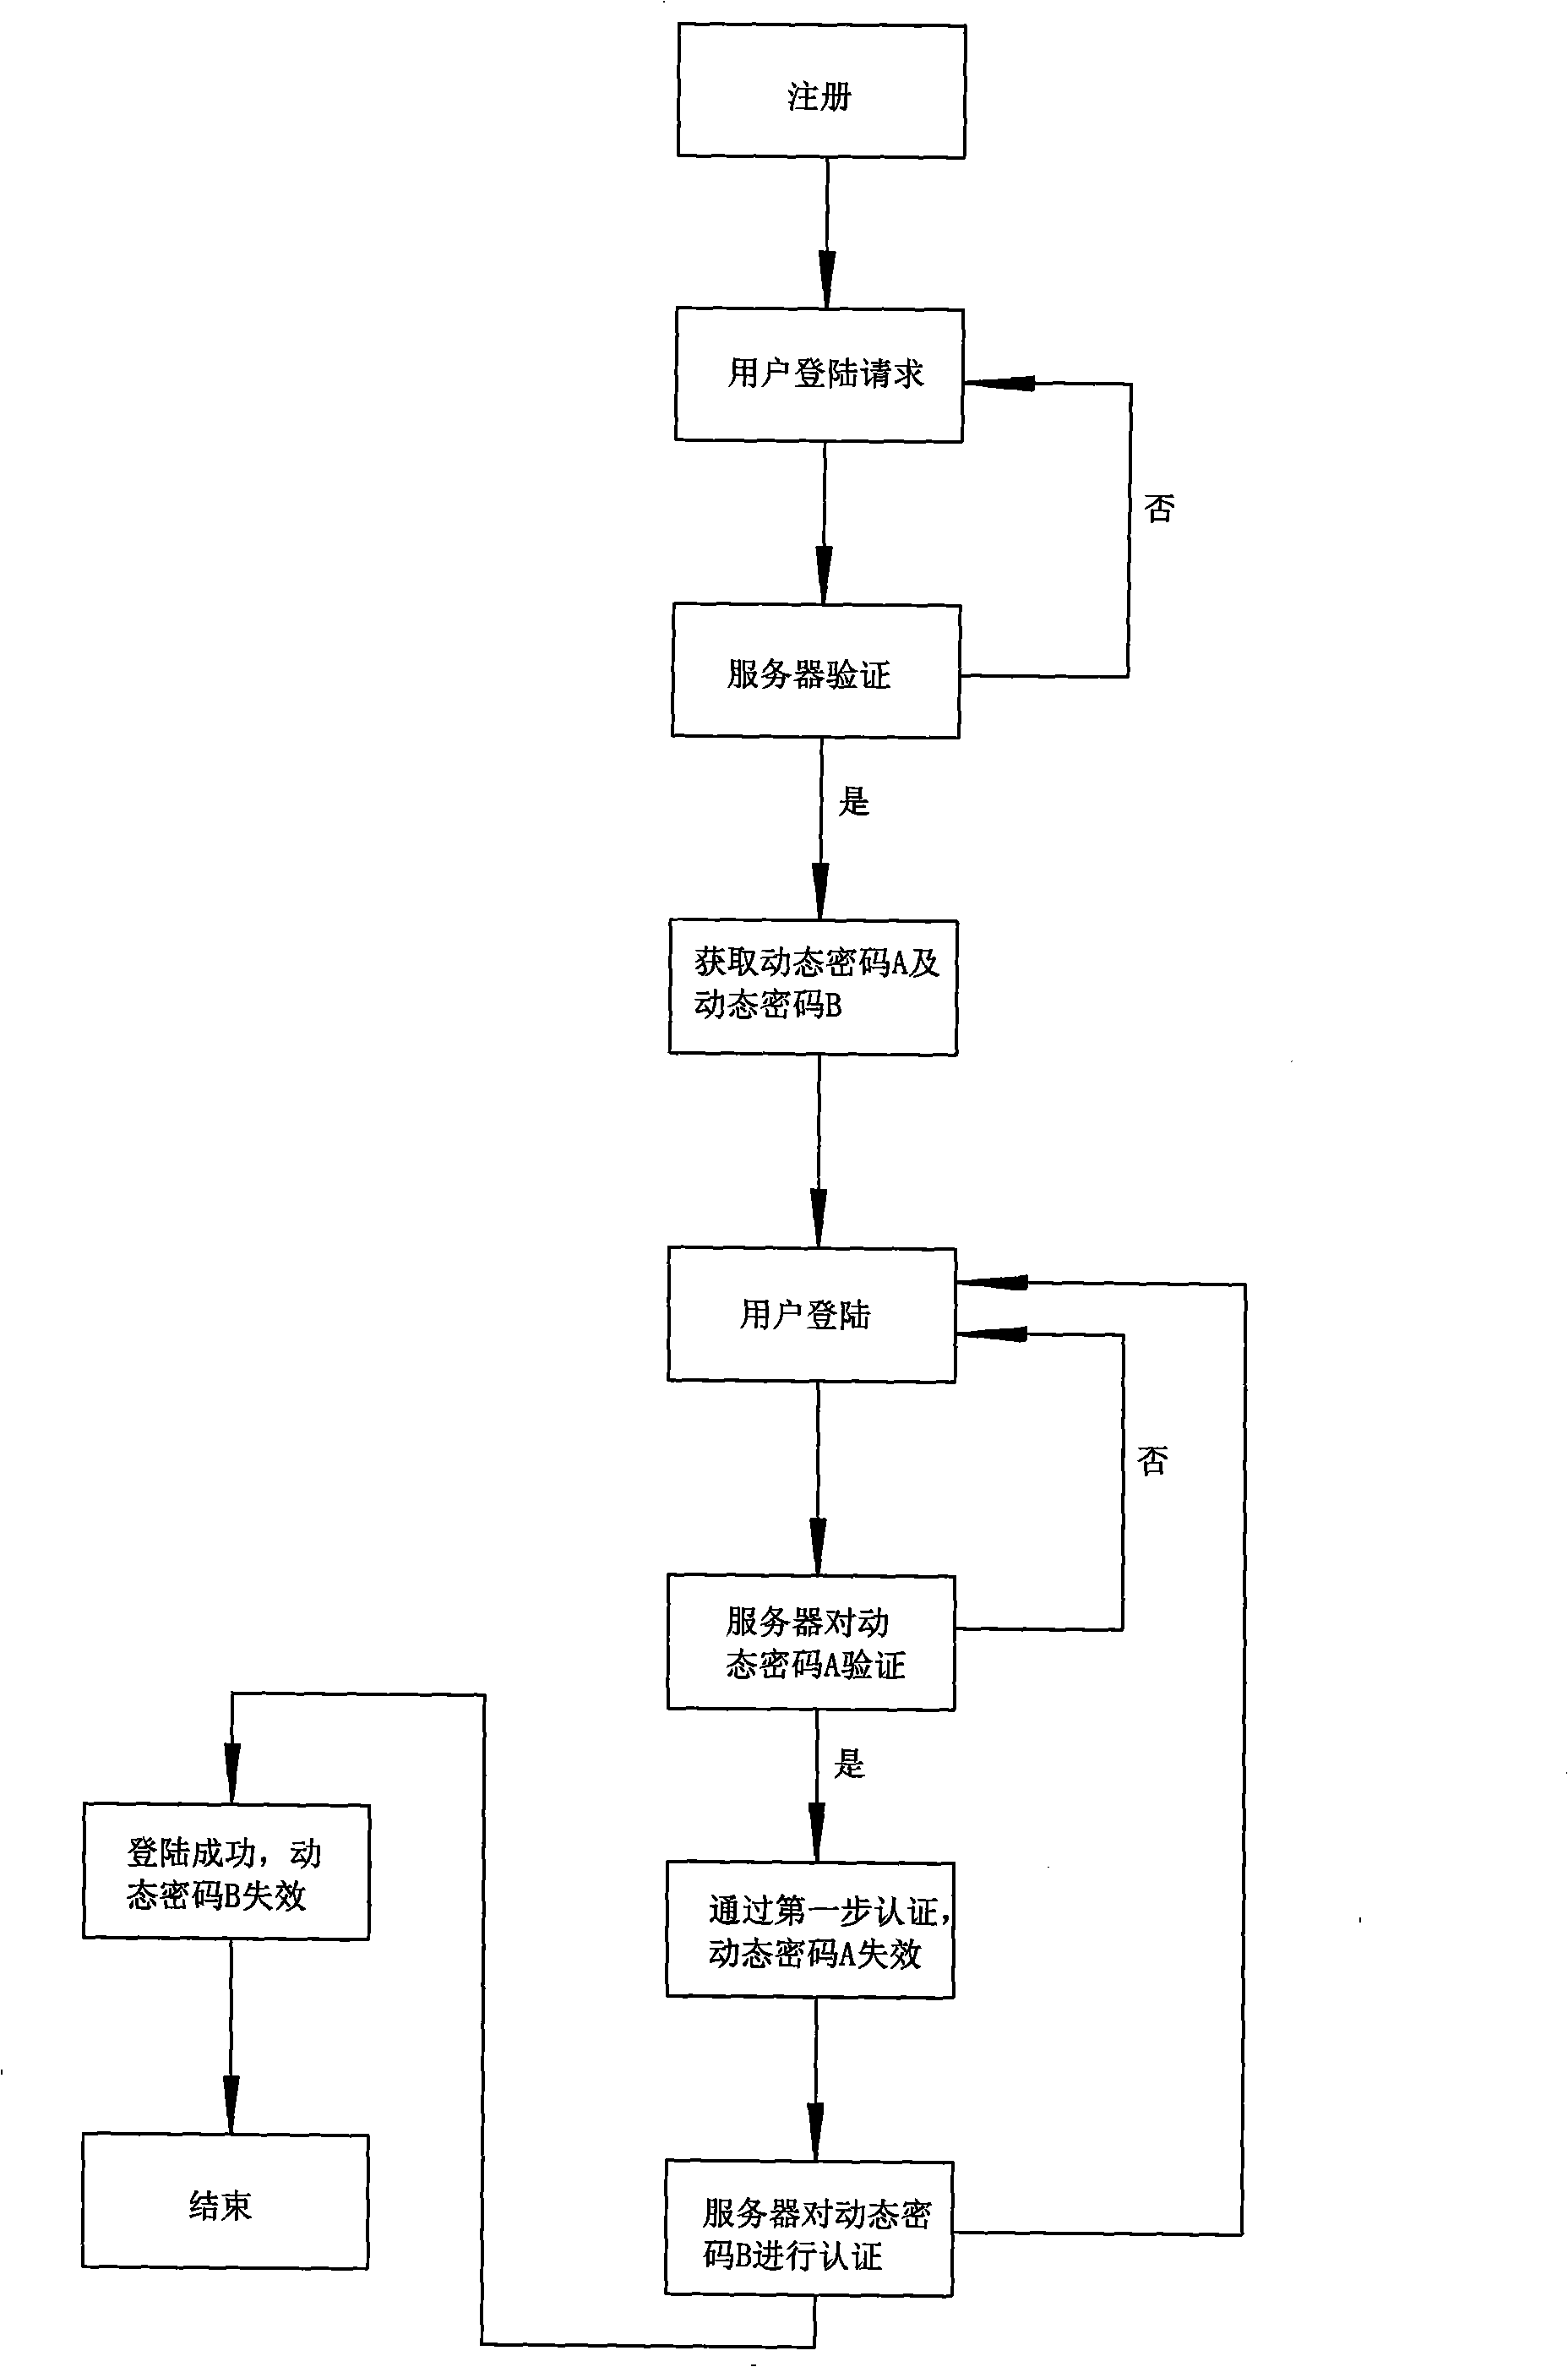 Method for protecting account number safety